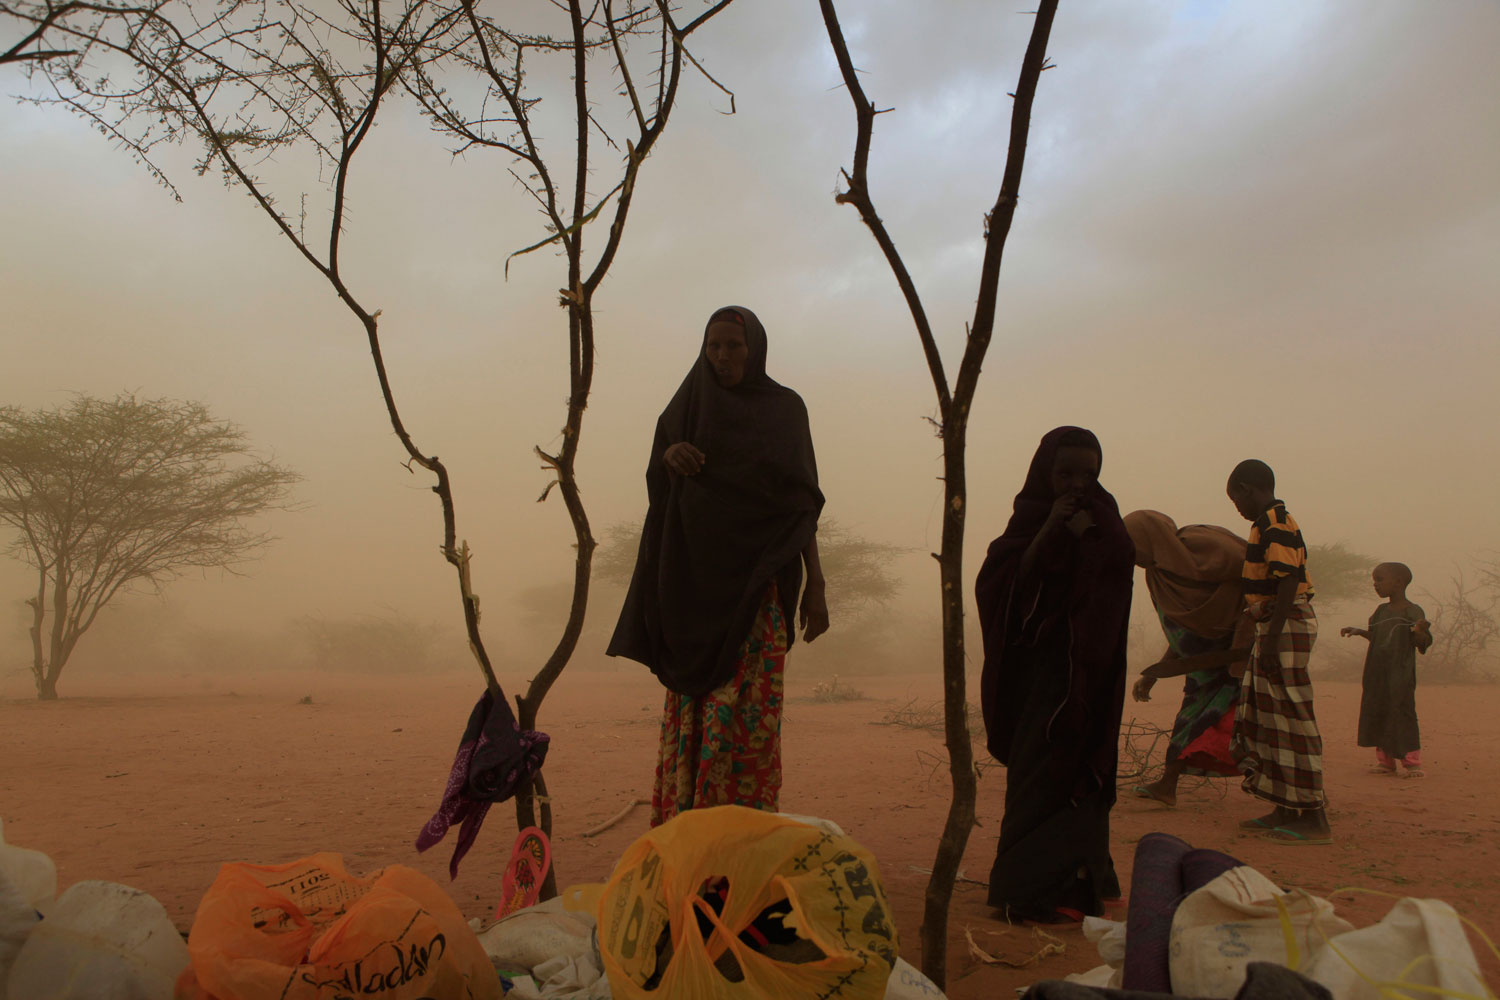 July 10, 2011. Members of a Somali family are overtaken by dust as they try to build a makeshift shelter on the outskirts of the Dagahaley camp, the world’s largest refugee settlement, outside Dadaab, Kenya. The drought in Somalia has been called the worst humanitarian disaster in the world by U.N. officials.